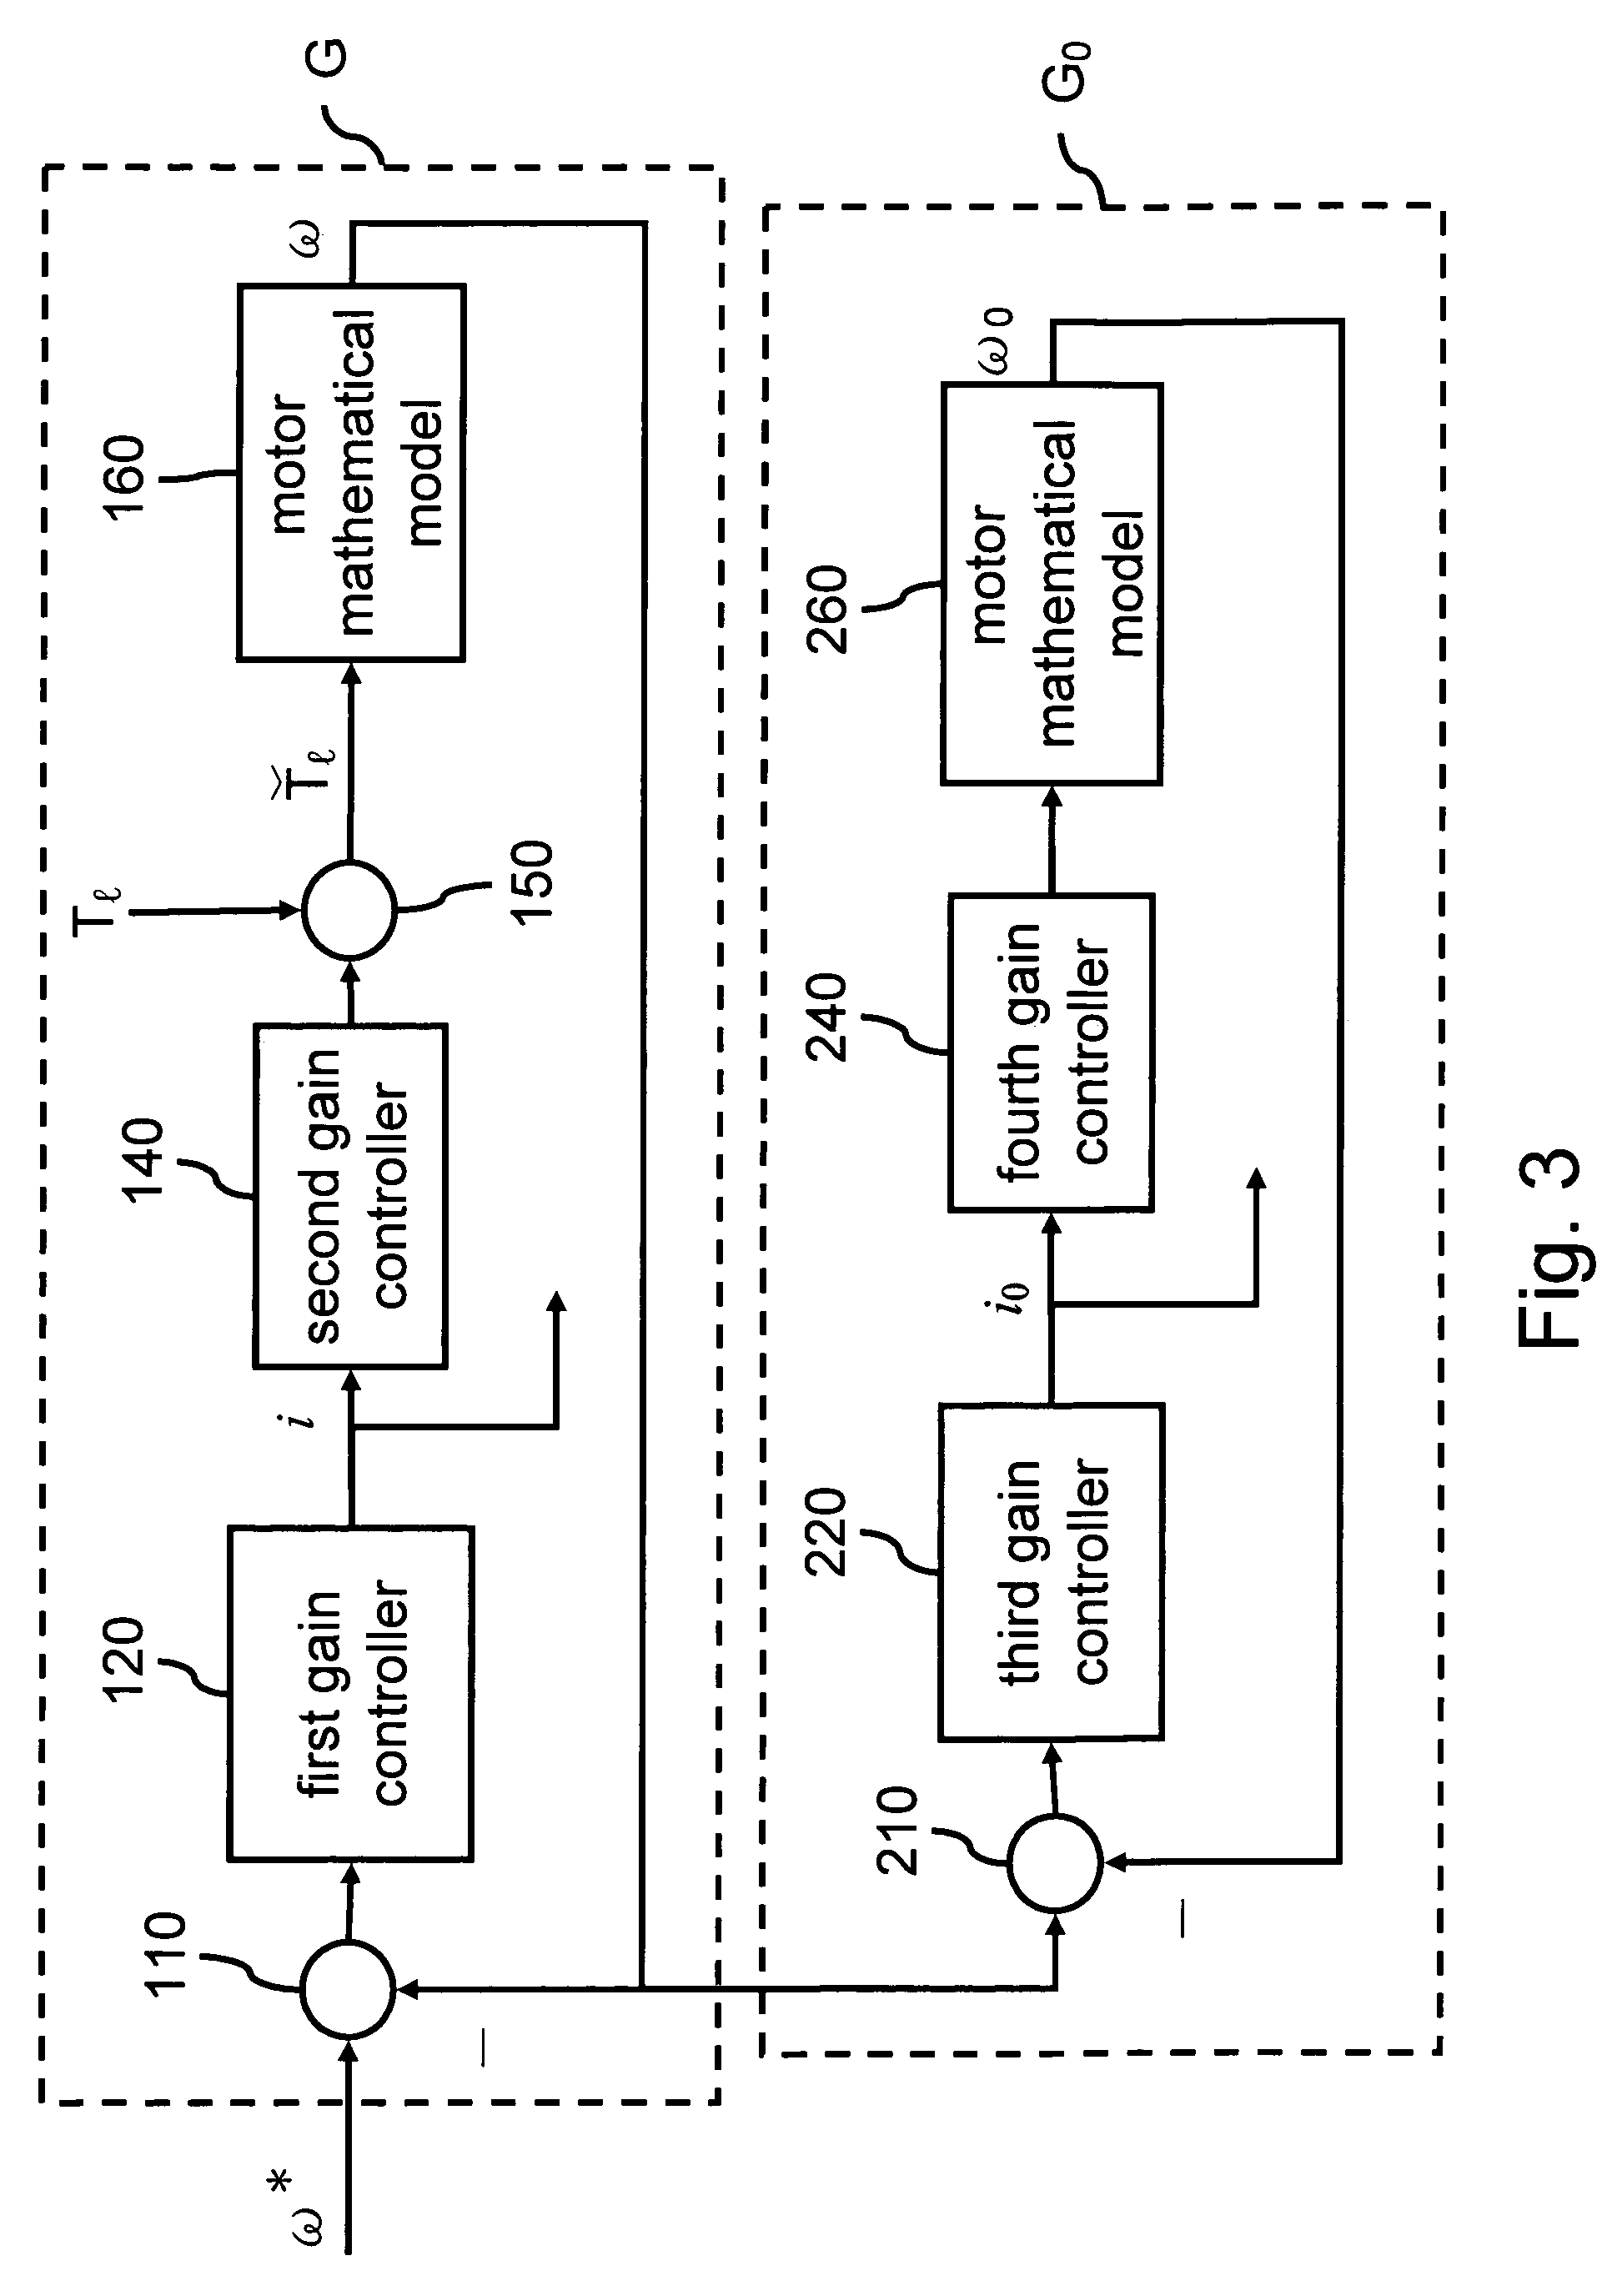 Method for estimating load inertia and a system for controlling motor speed using inverse model